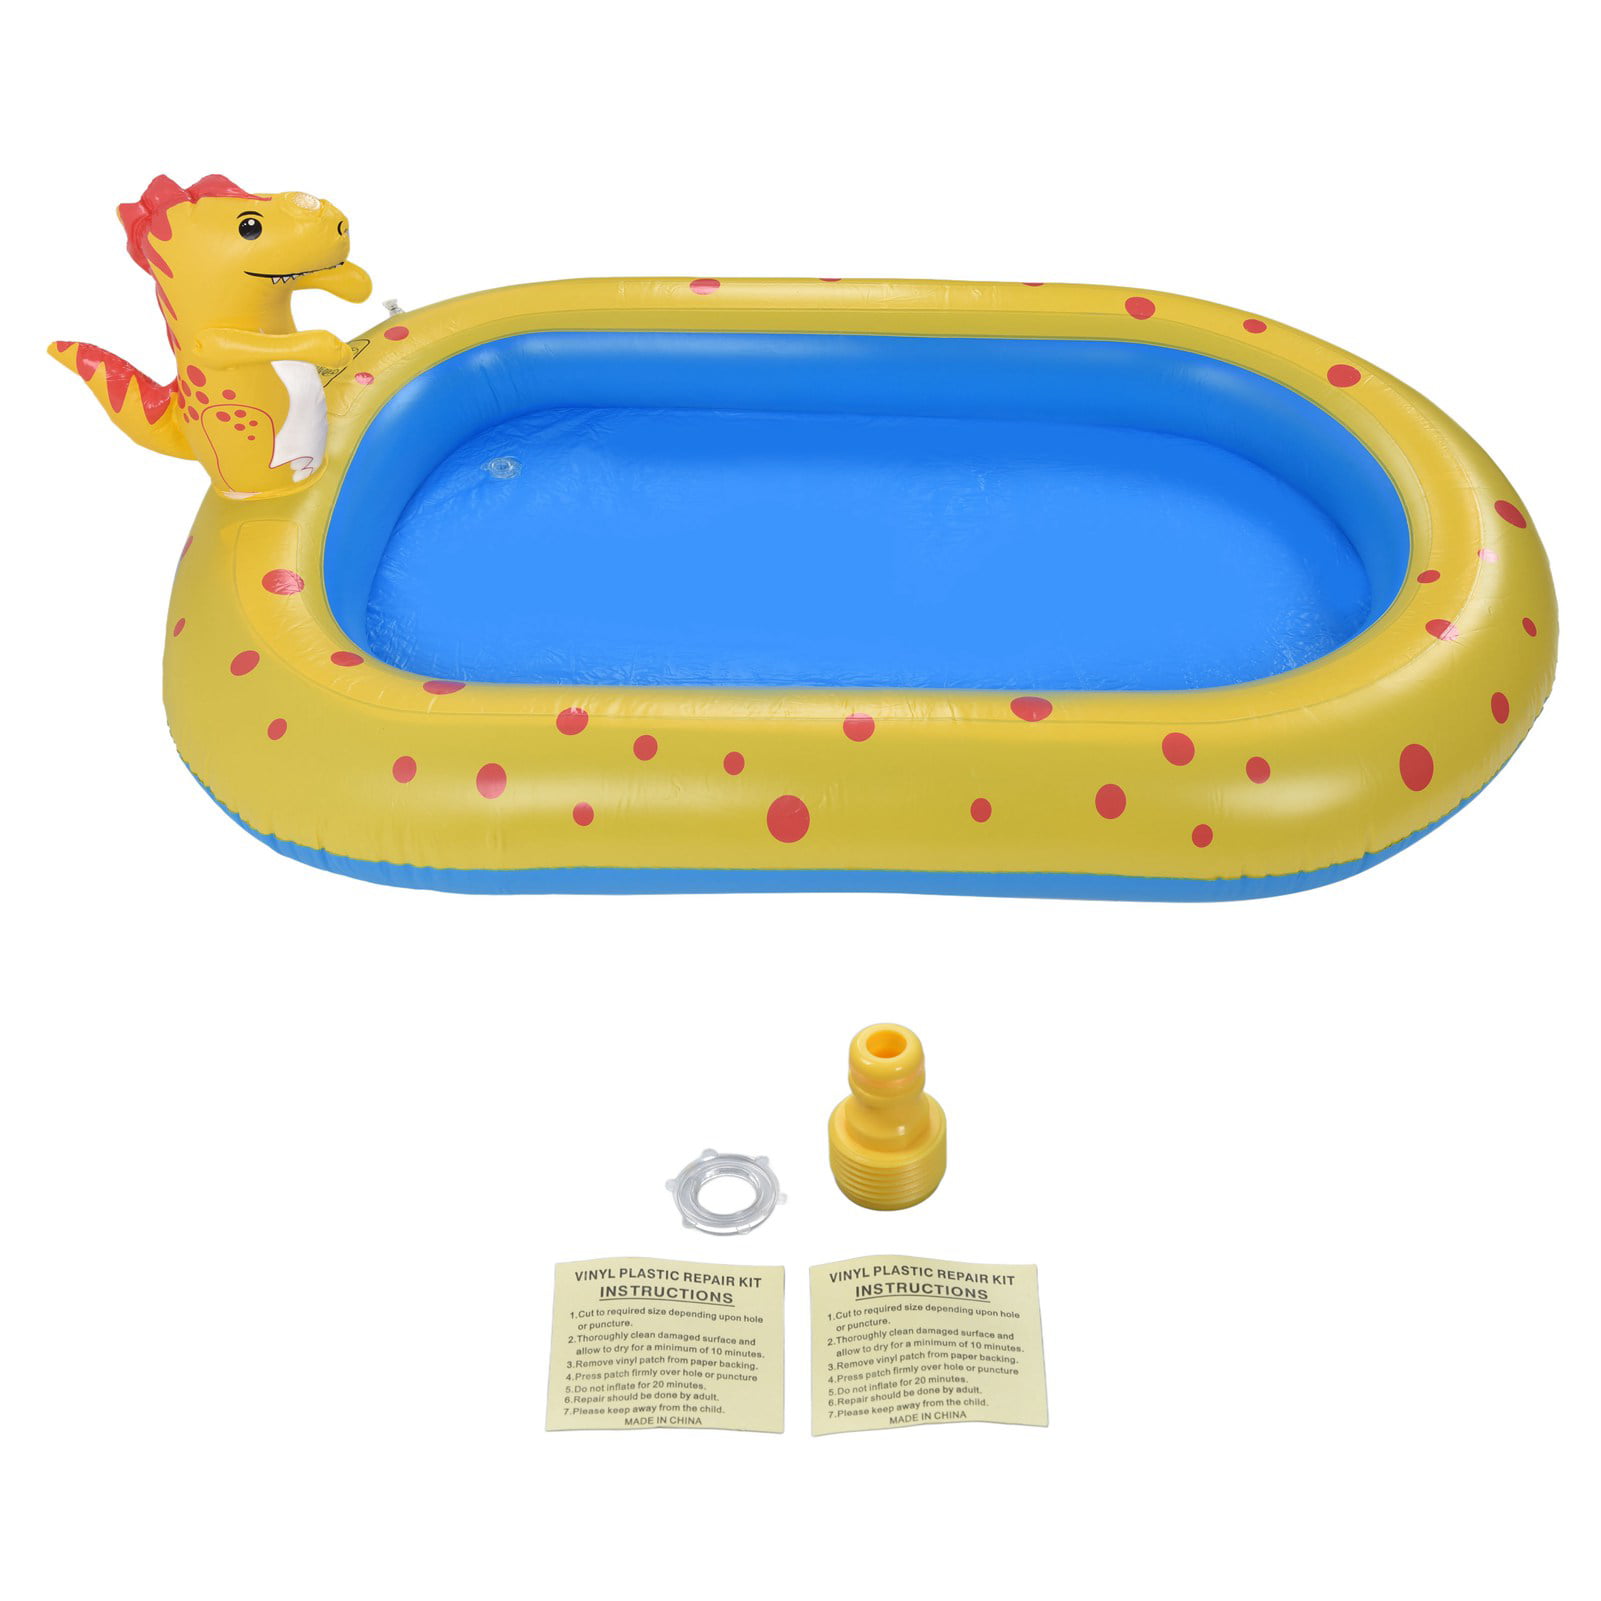 Colorful Round Inflatable White Cartoon Dinosaur Baby Toddler Size Swimming Pool 